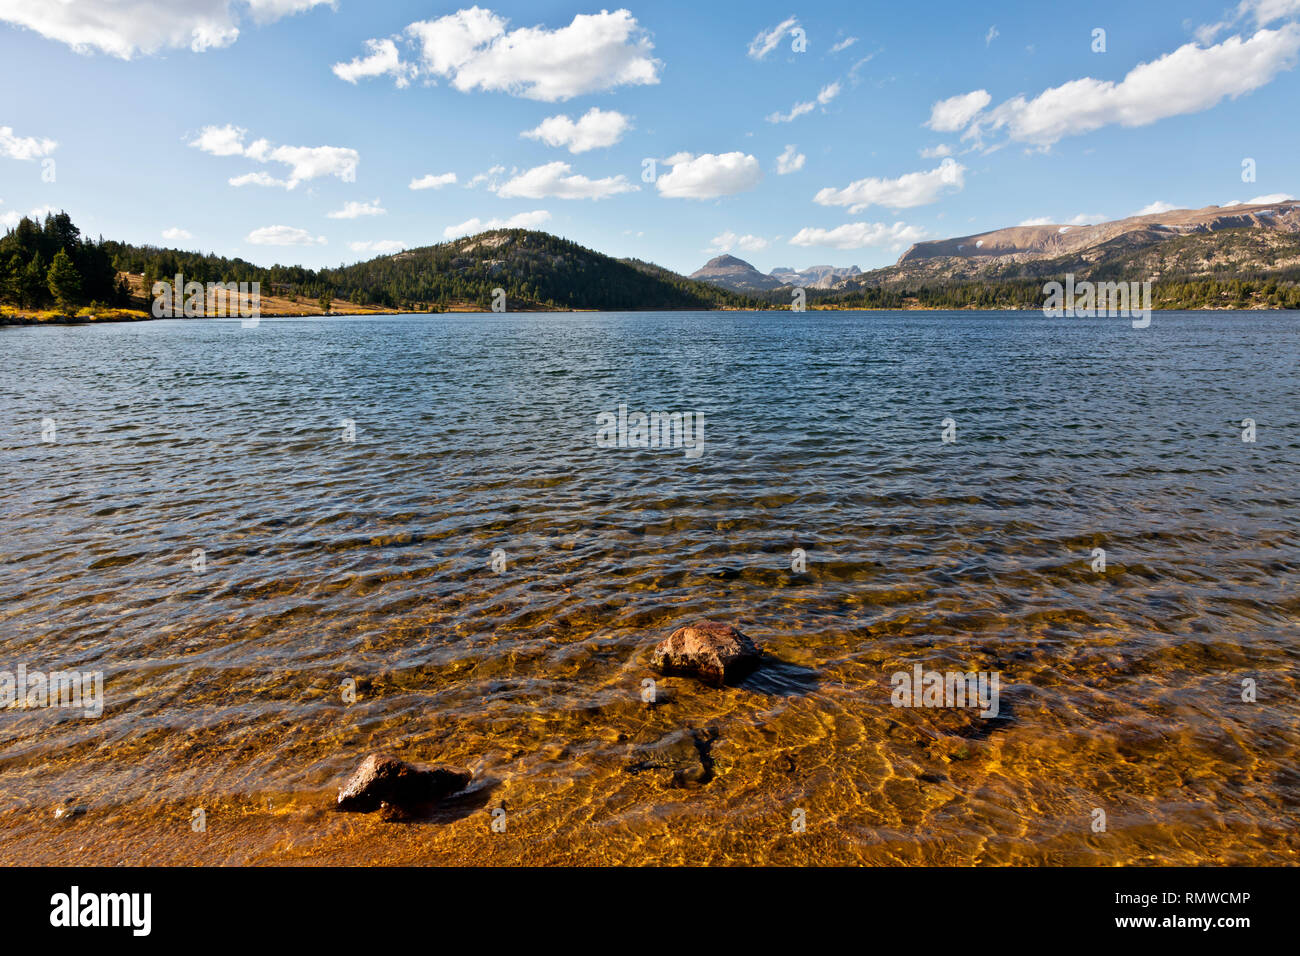 WY03775-00...WYOMING - Island Lake located near the Beartooth Scenic Byway in the Shoshone National Forest. Stock Photo